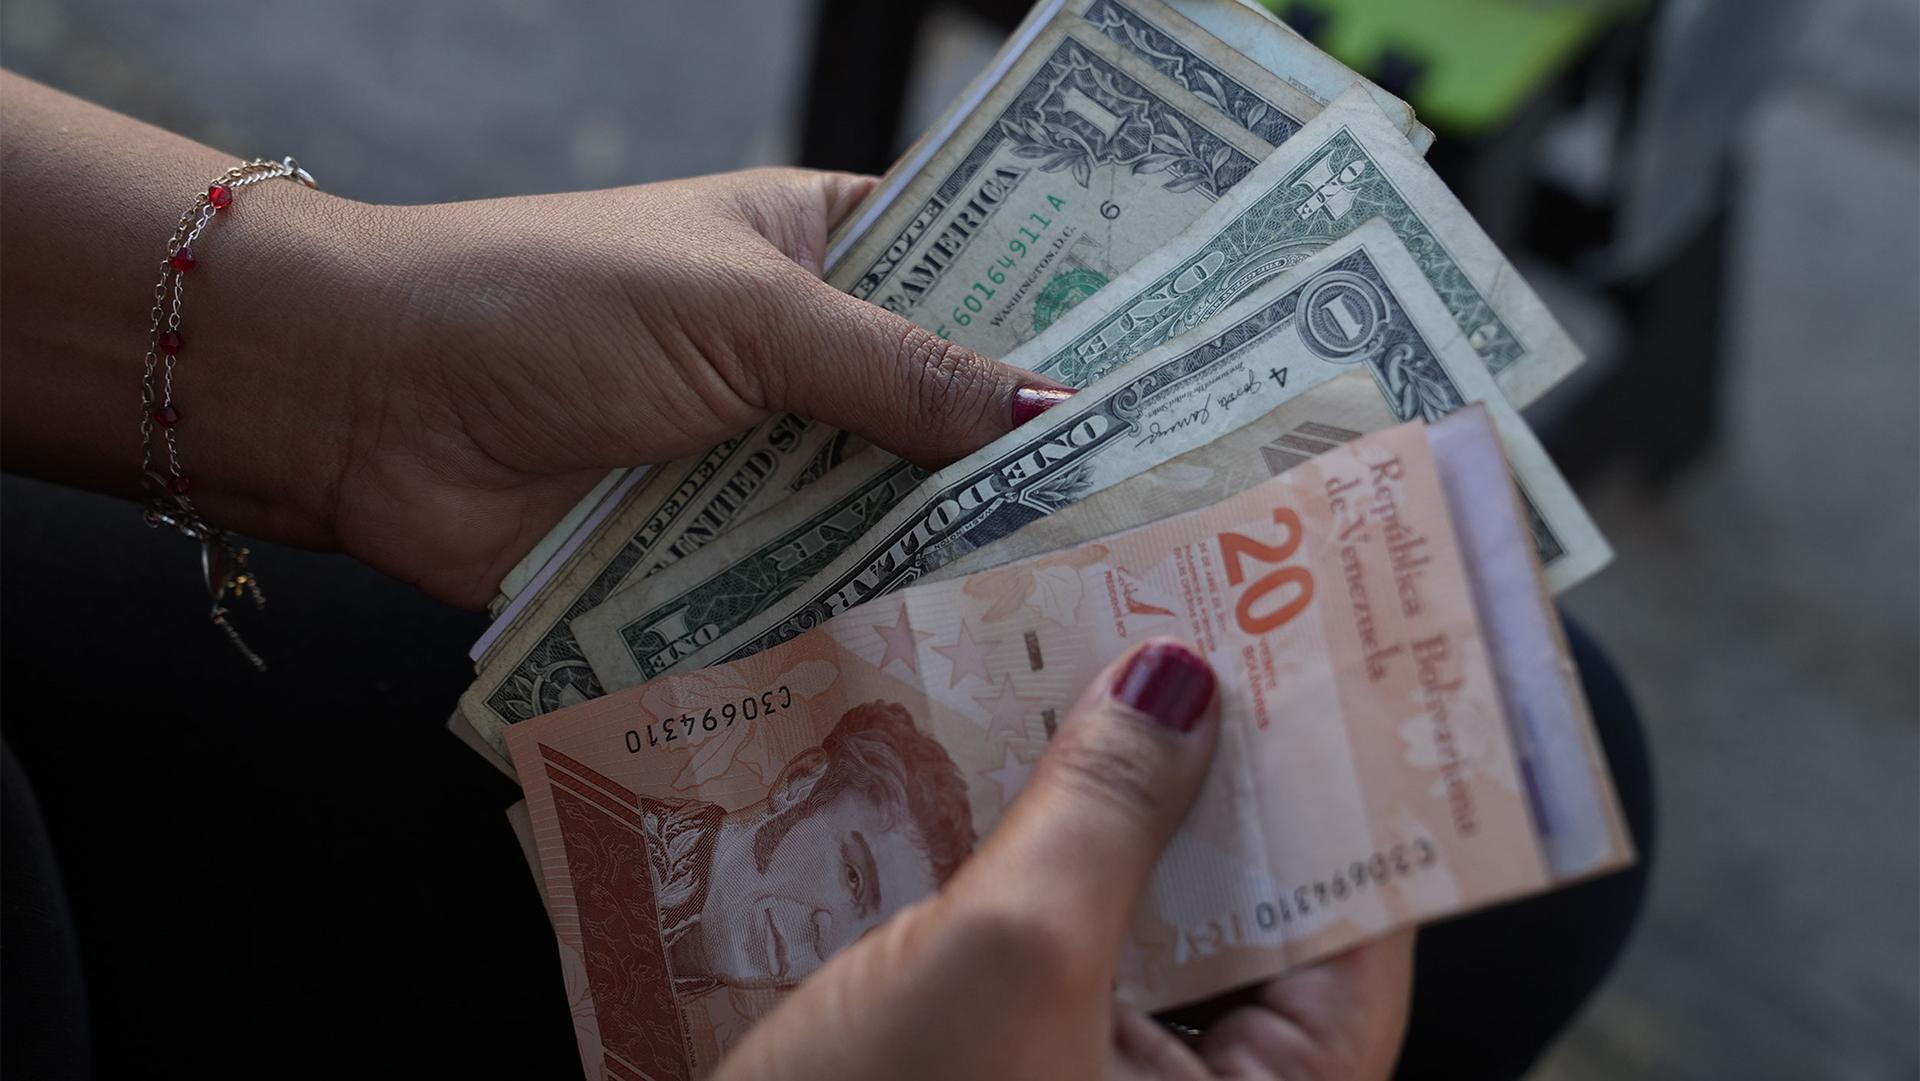 US dollars are now commonly used by businesses in Venezuela. The informal adoption of the dollar has helped to decrease inflation and product shortages.